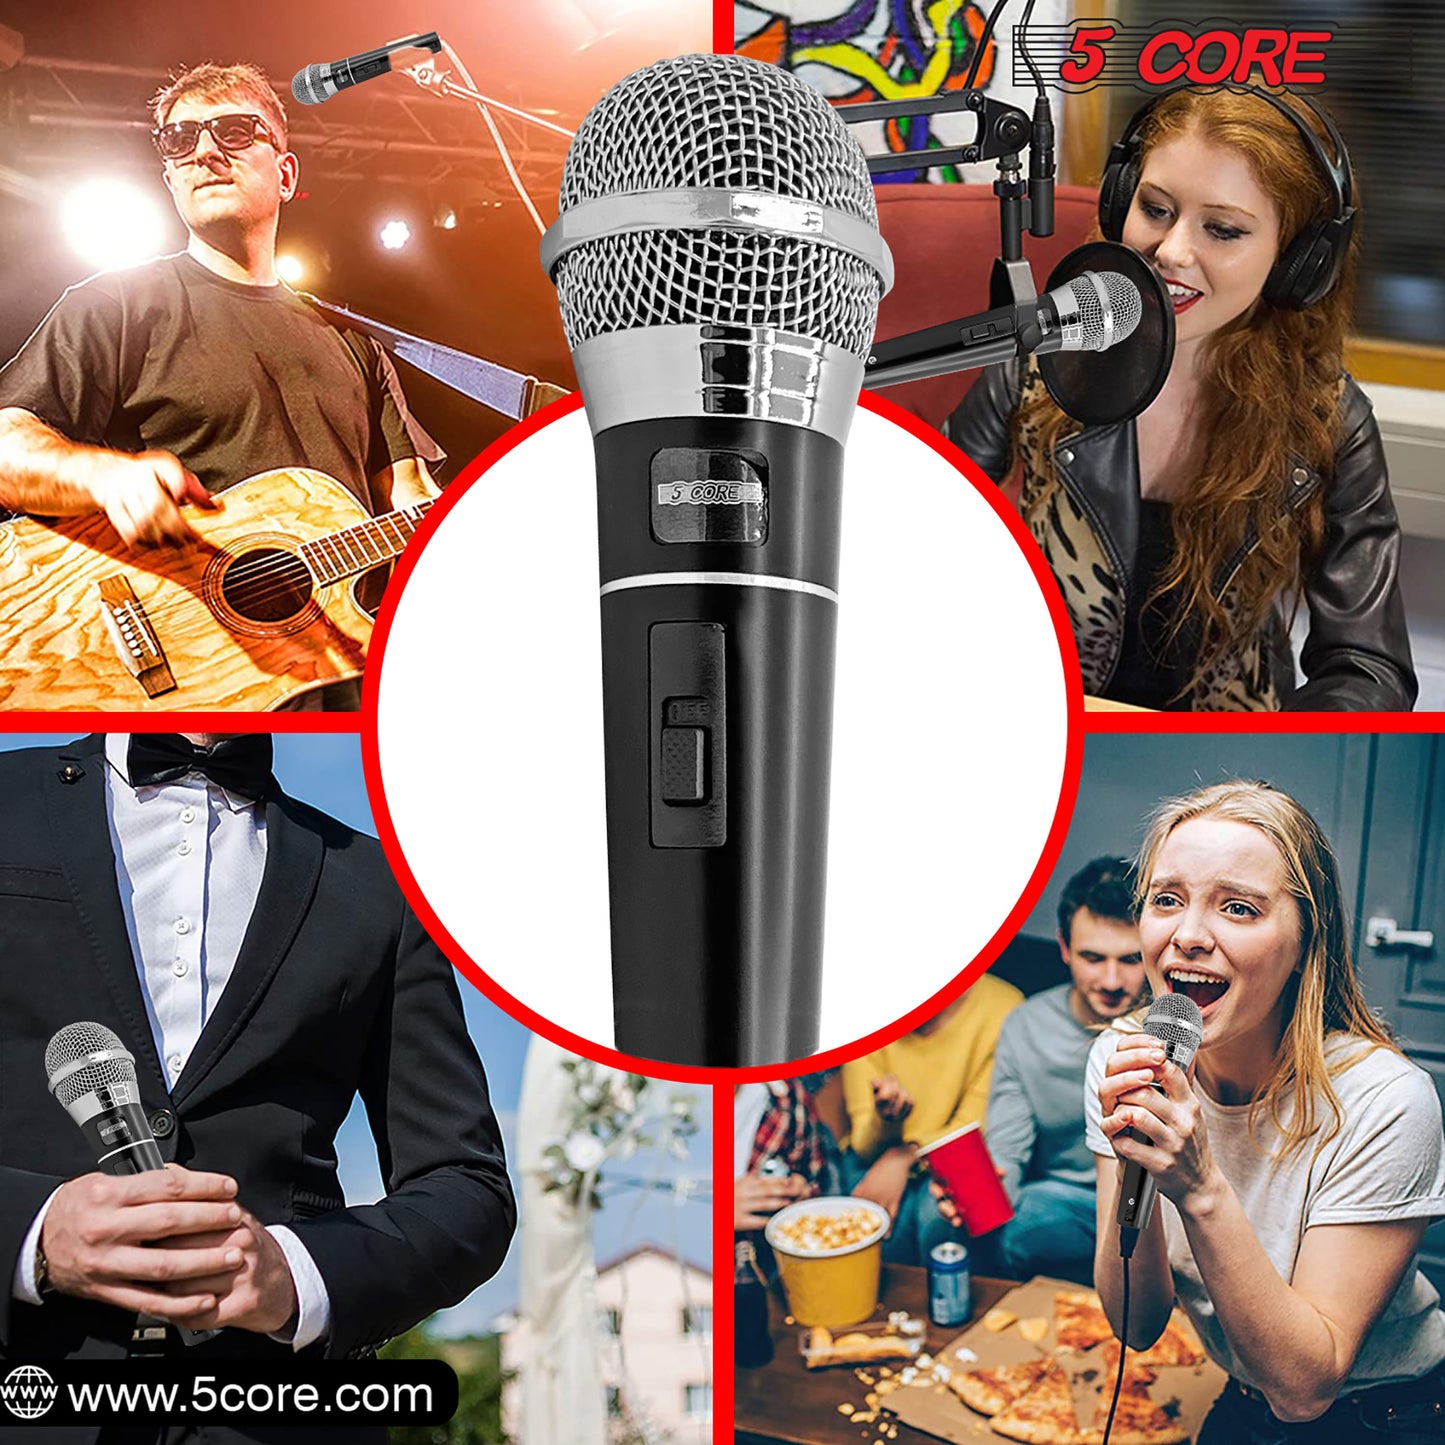 5 CORE Premium Vocal Dynamic Cardioid Handheld Microphone Unidirectional Mic with 16ft Detachable XLR Cable to ? inch Audio Jack and On/Off Switch for Karaoke Singing PM 100